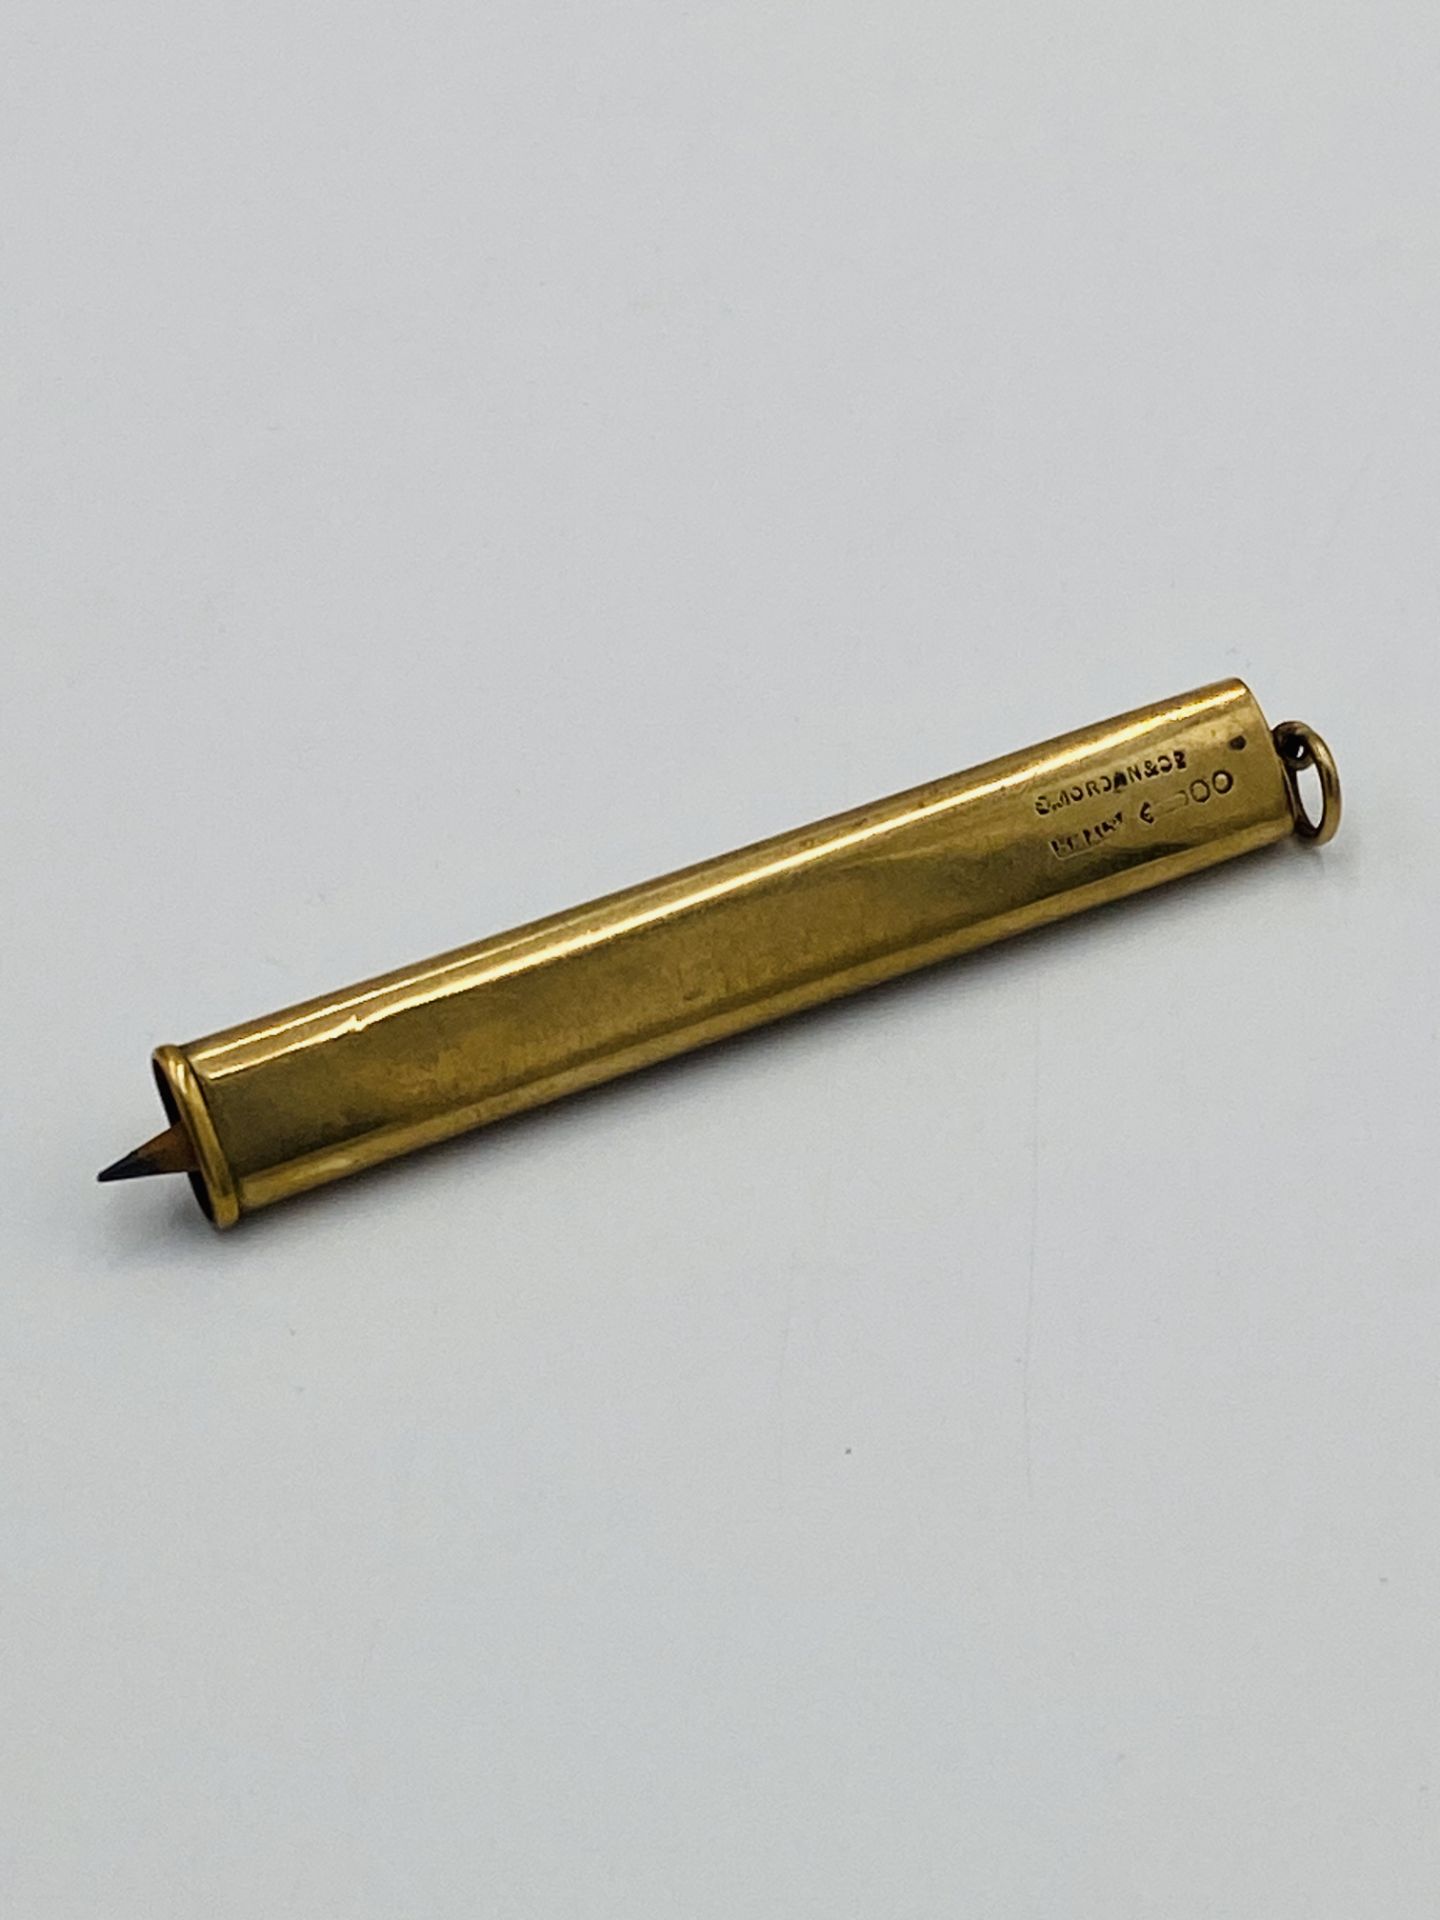 9ct gold propelling pencil - Image 4 of 6